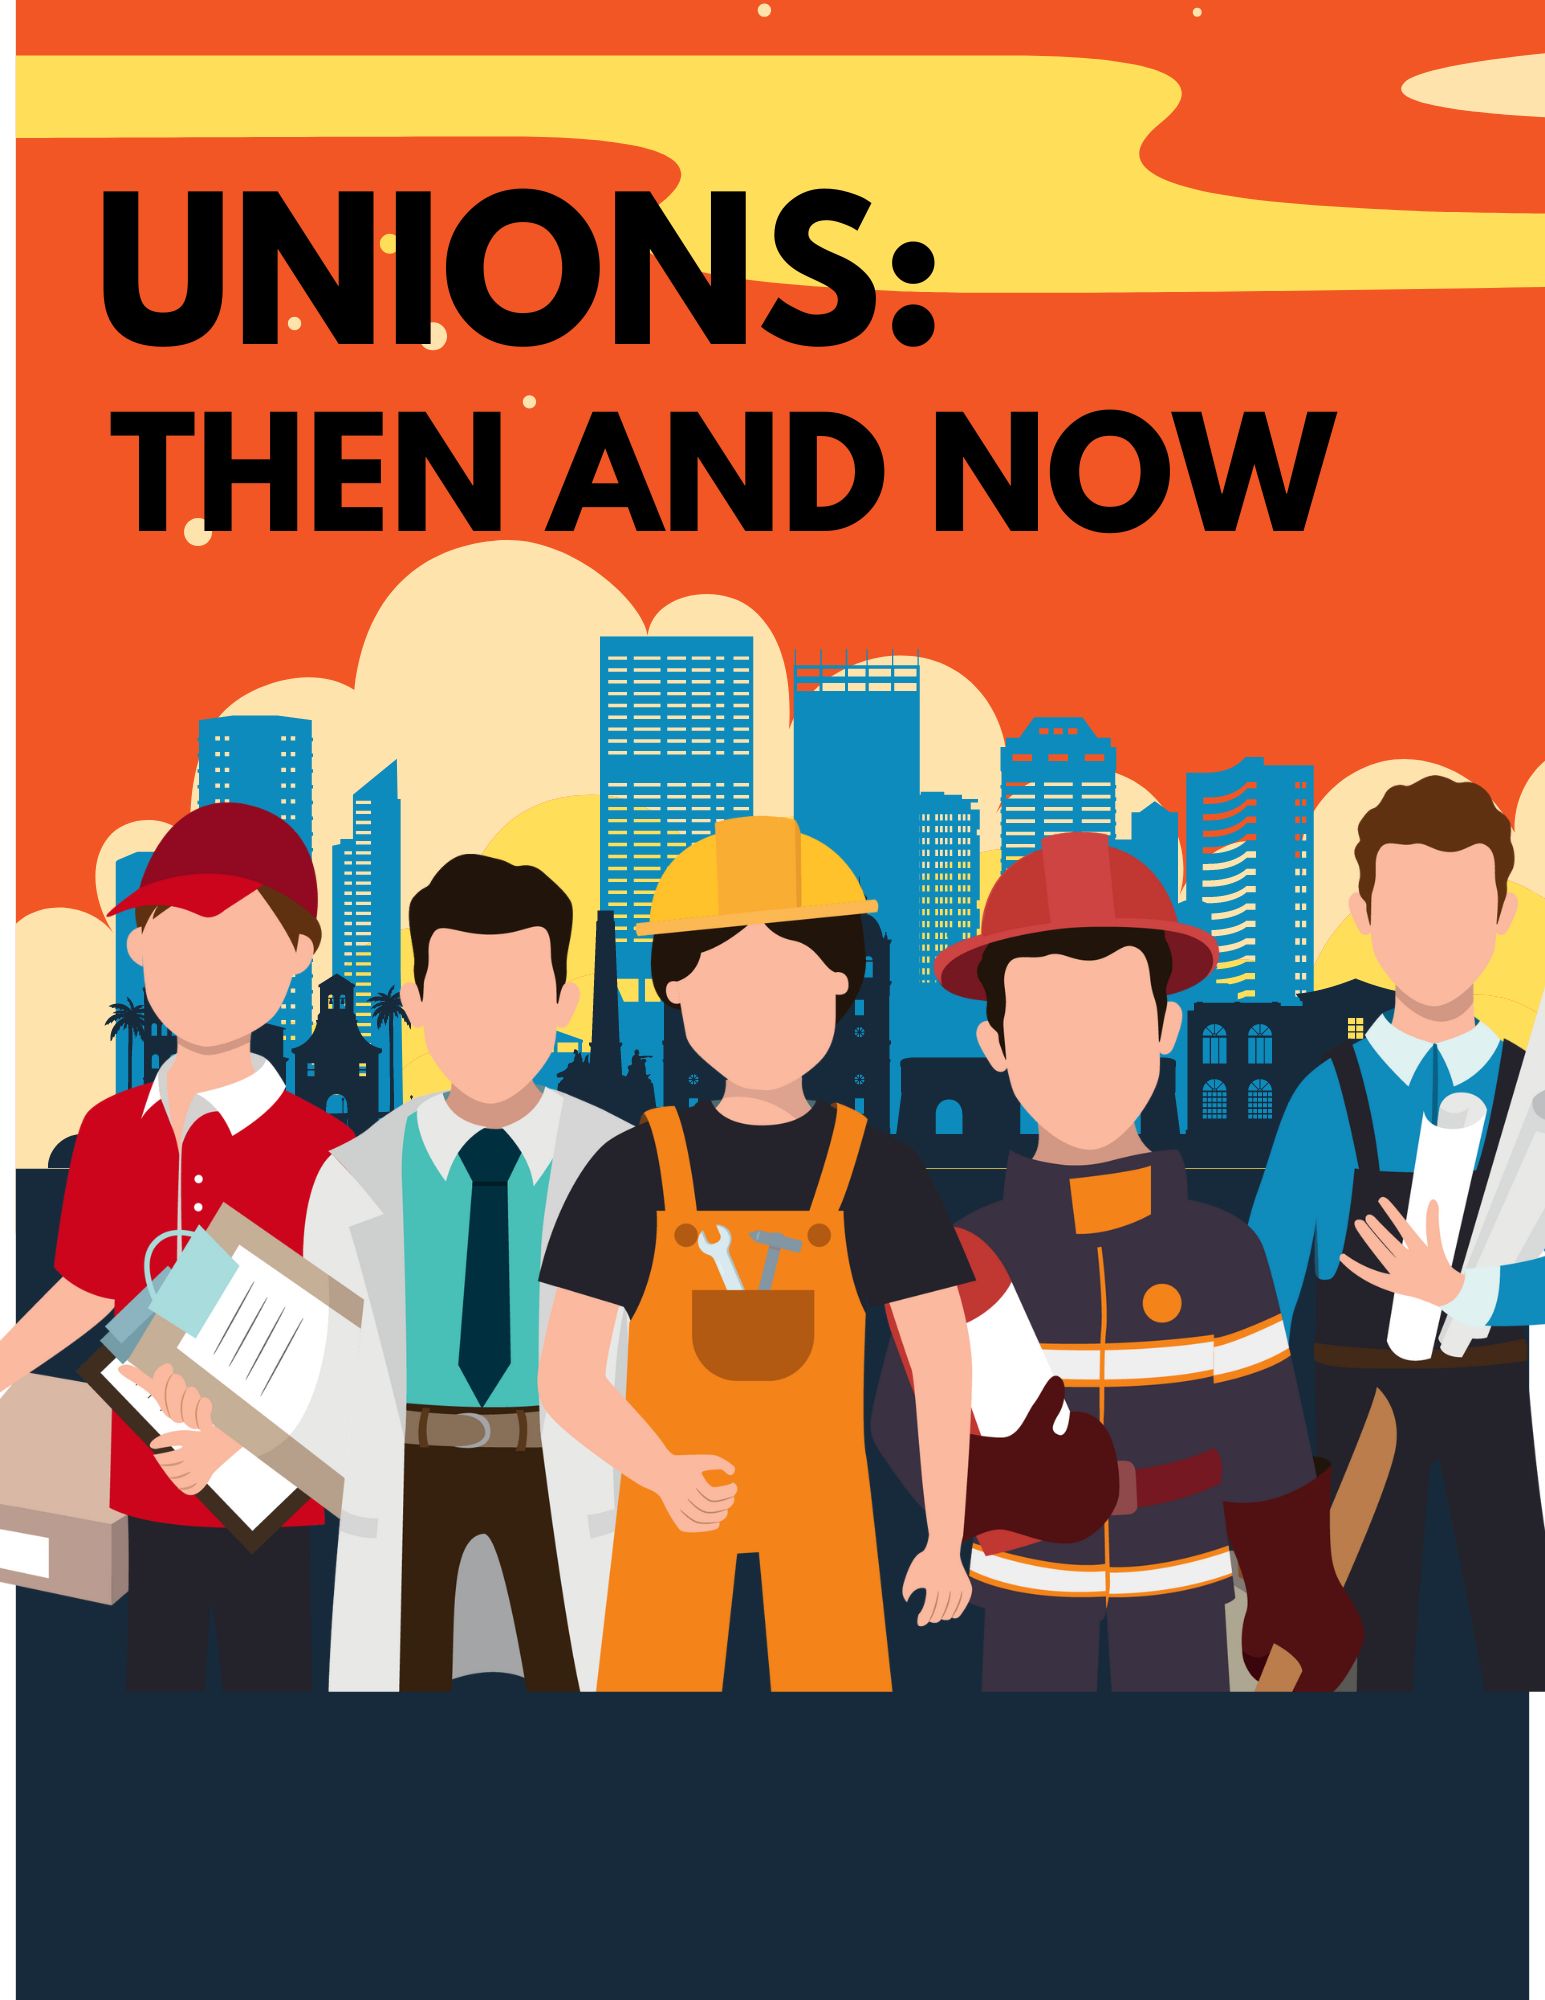 Unions In Michigan: then and now